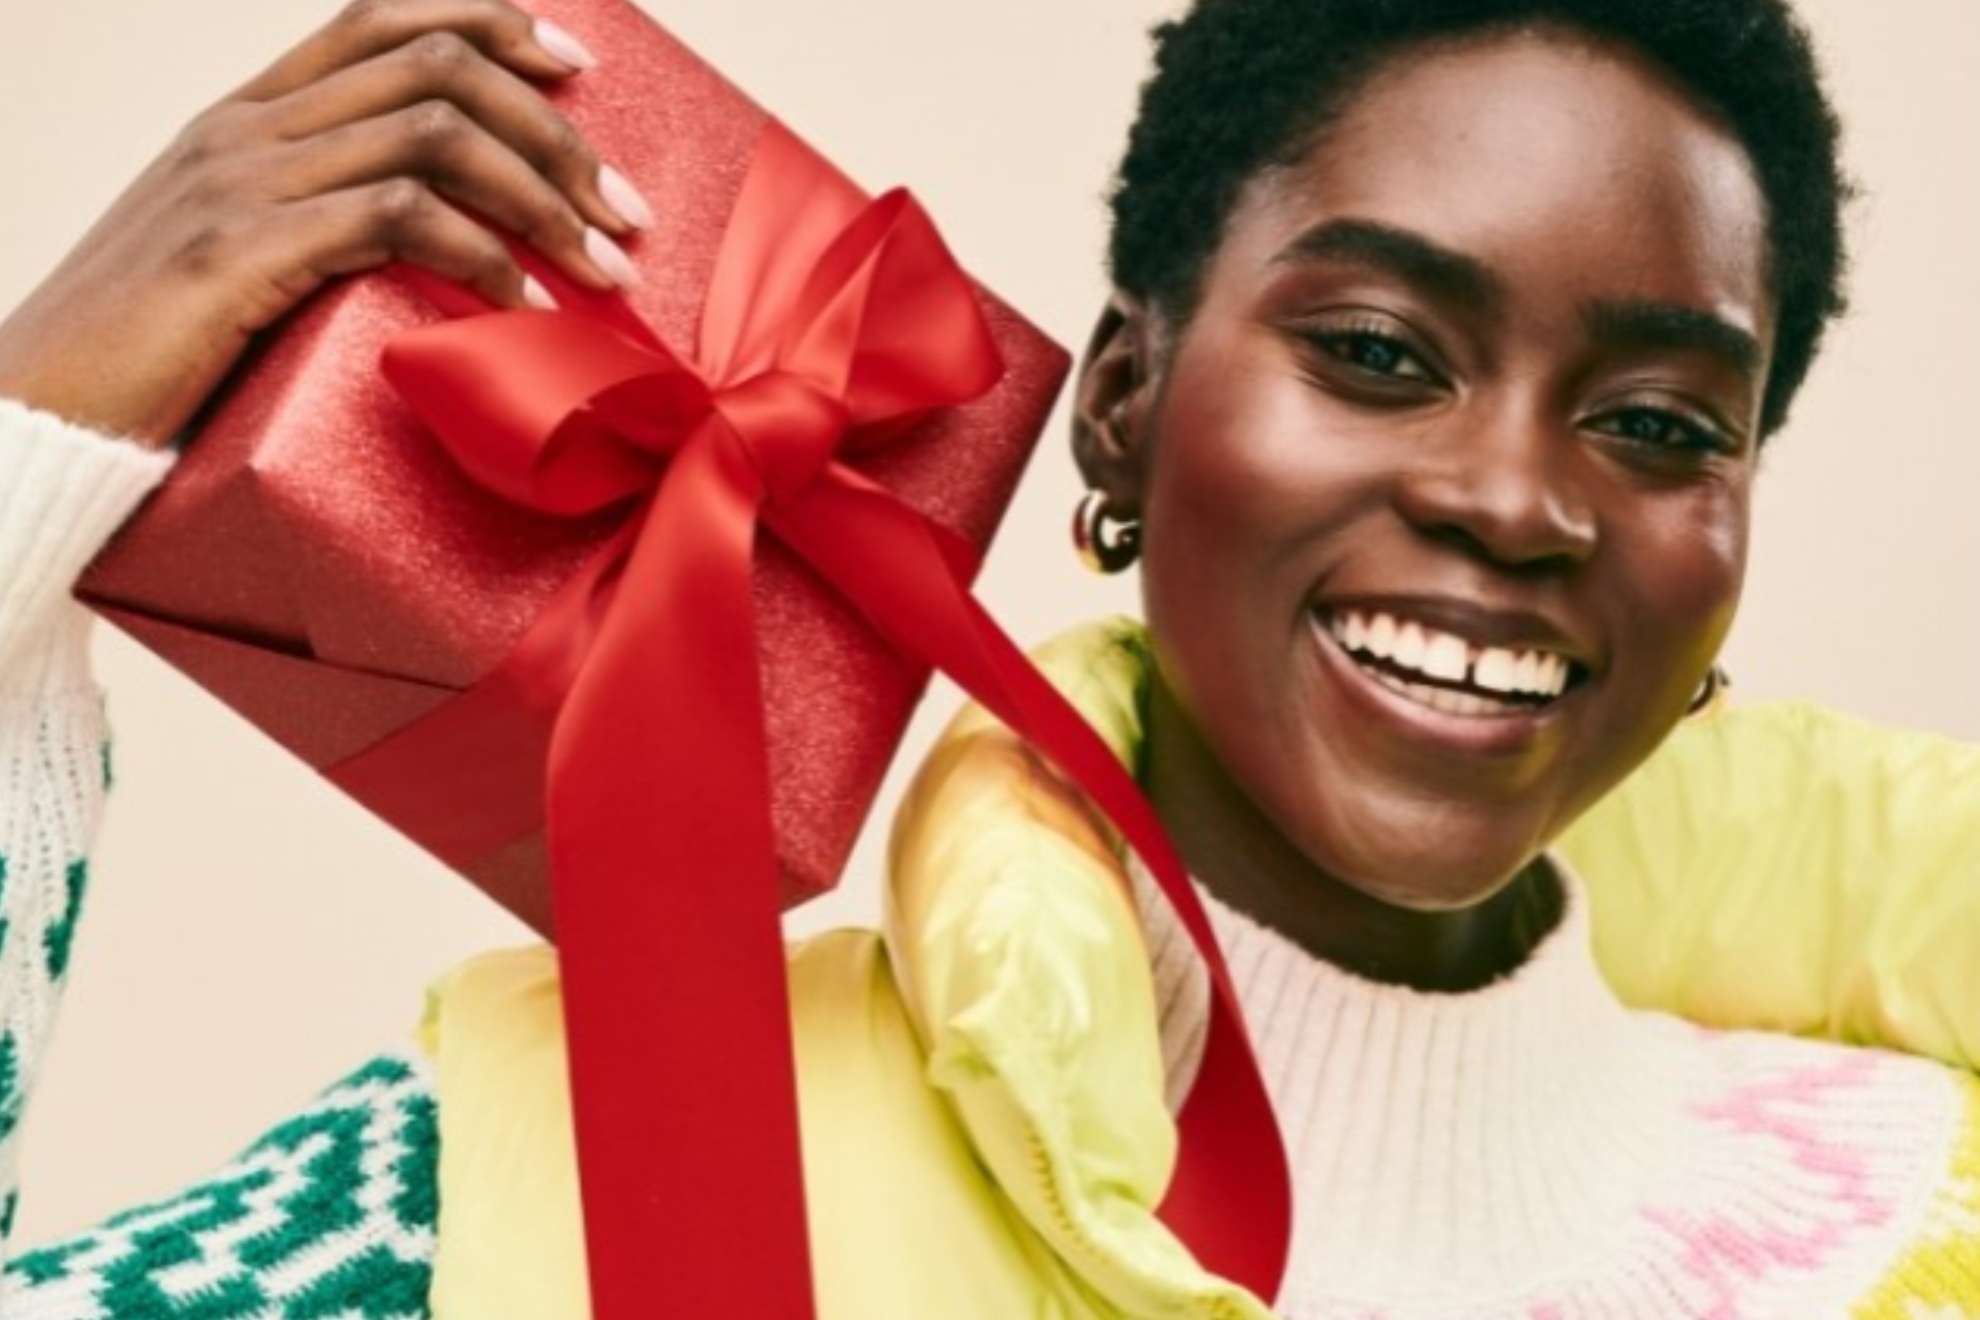 Cyber Monday deals have taken over your favorite fashion stores